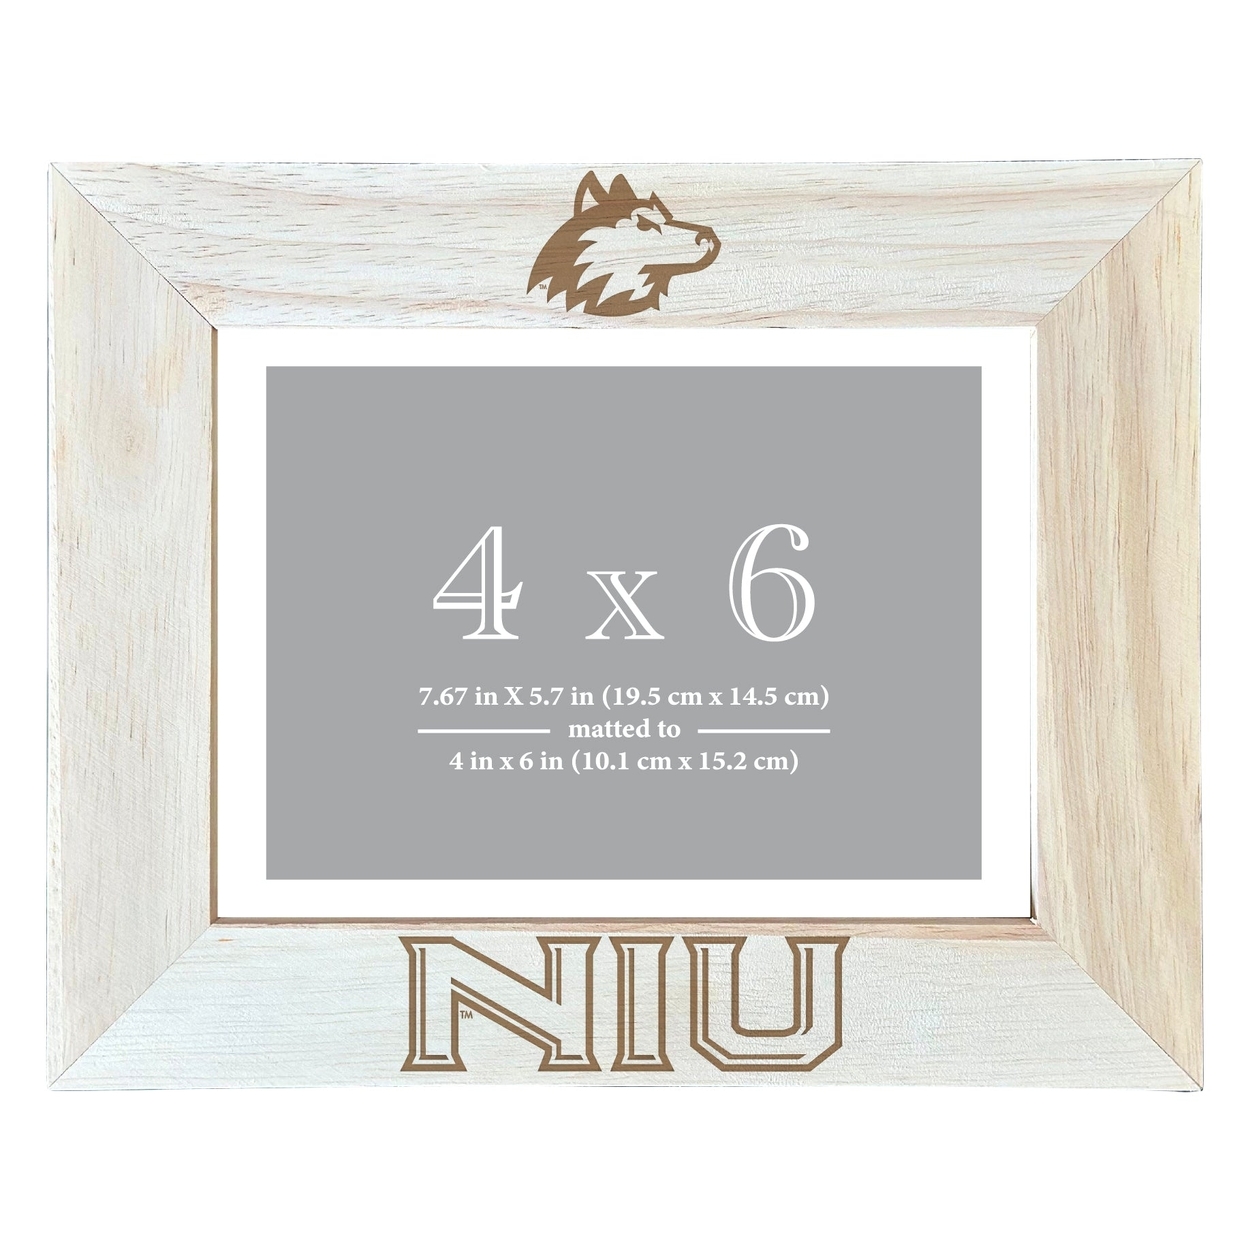 Northern Illinois Huskies Wooden Photo Frame Matted To 4 X 6 Inch - Etched